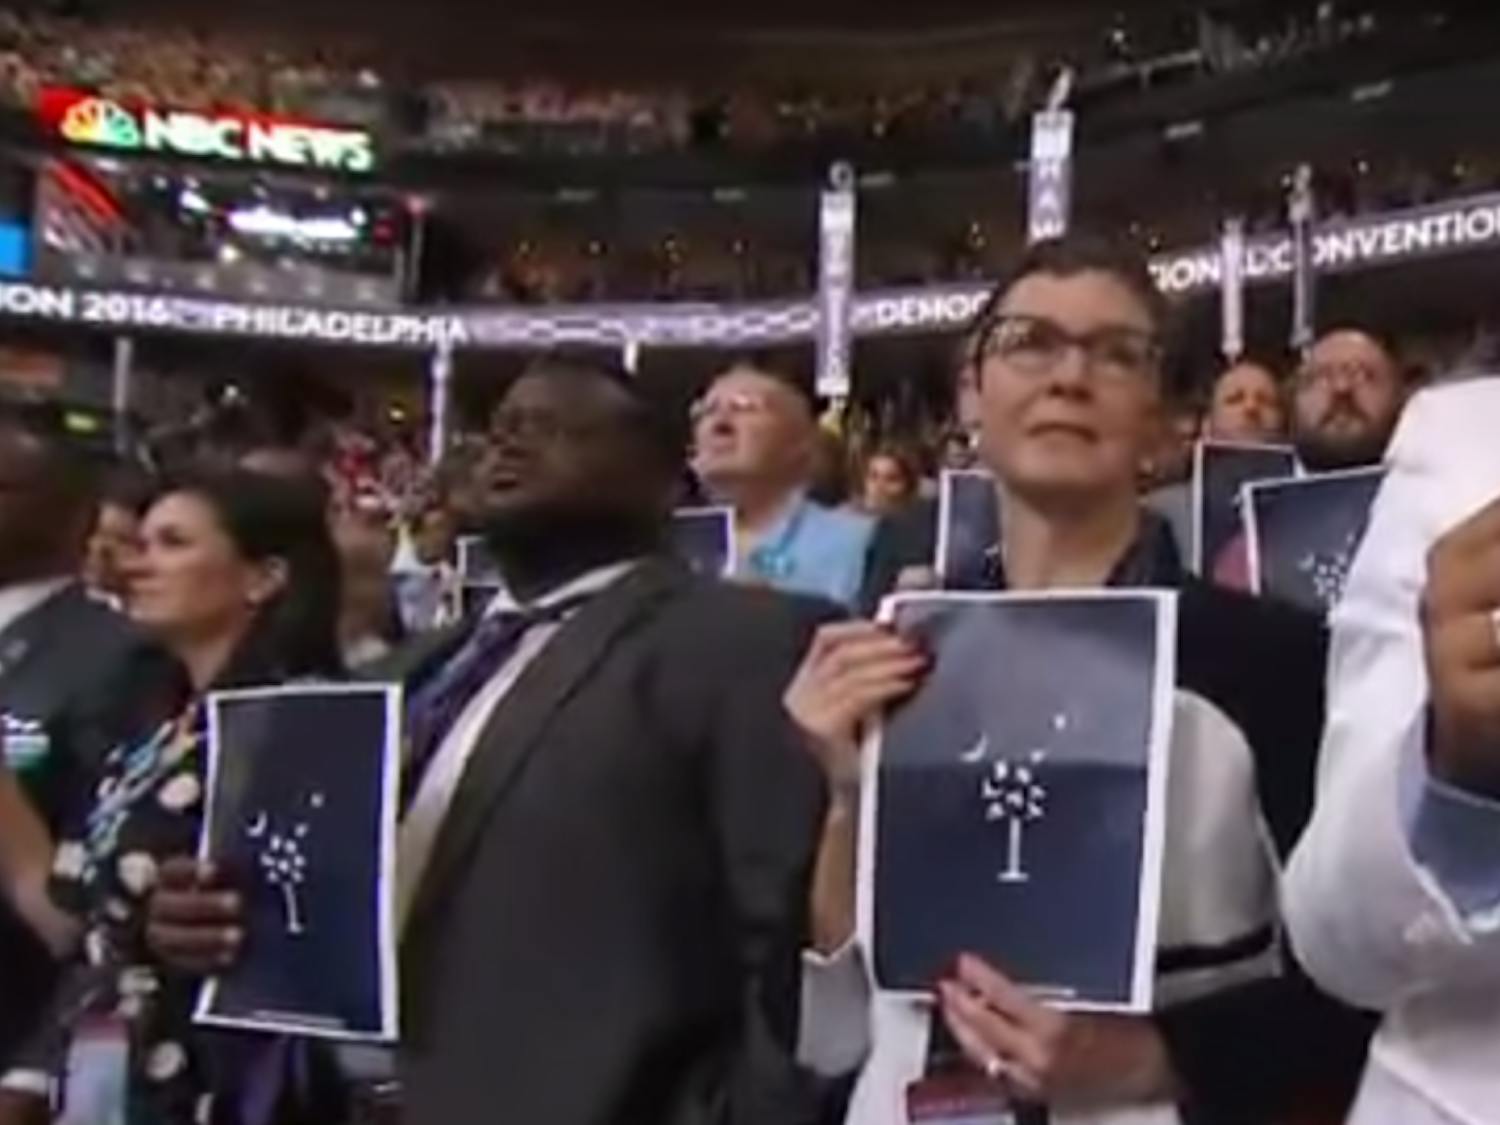 South Carolina delegates hold up symbolic placards in memory of the victims of the Emanuel AME church shooting in Charleston during speeches that two survivors of the attack gave at the Democratic National Convention in Philadelphia on July 27, 2016.